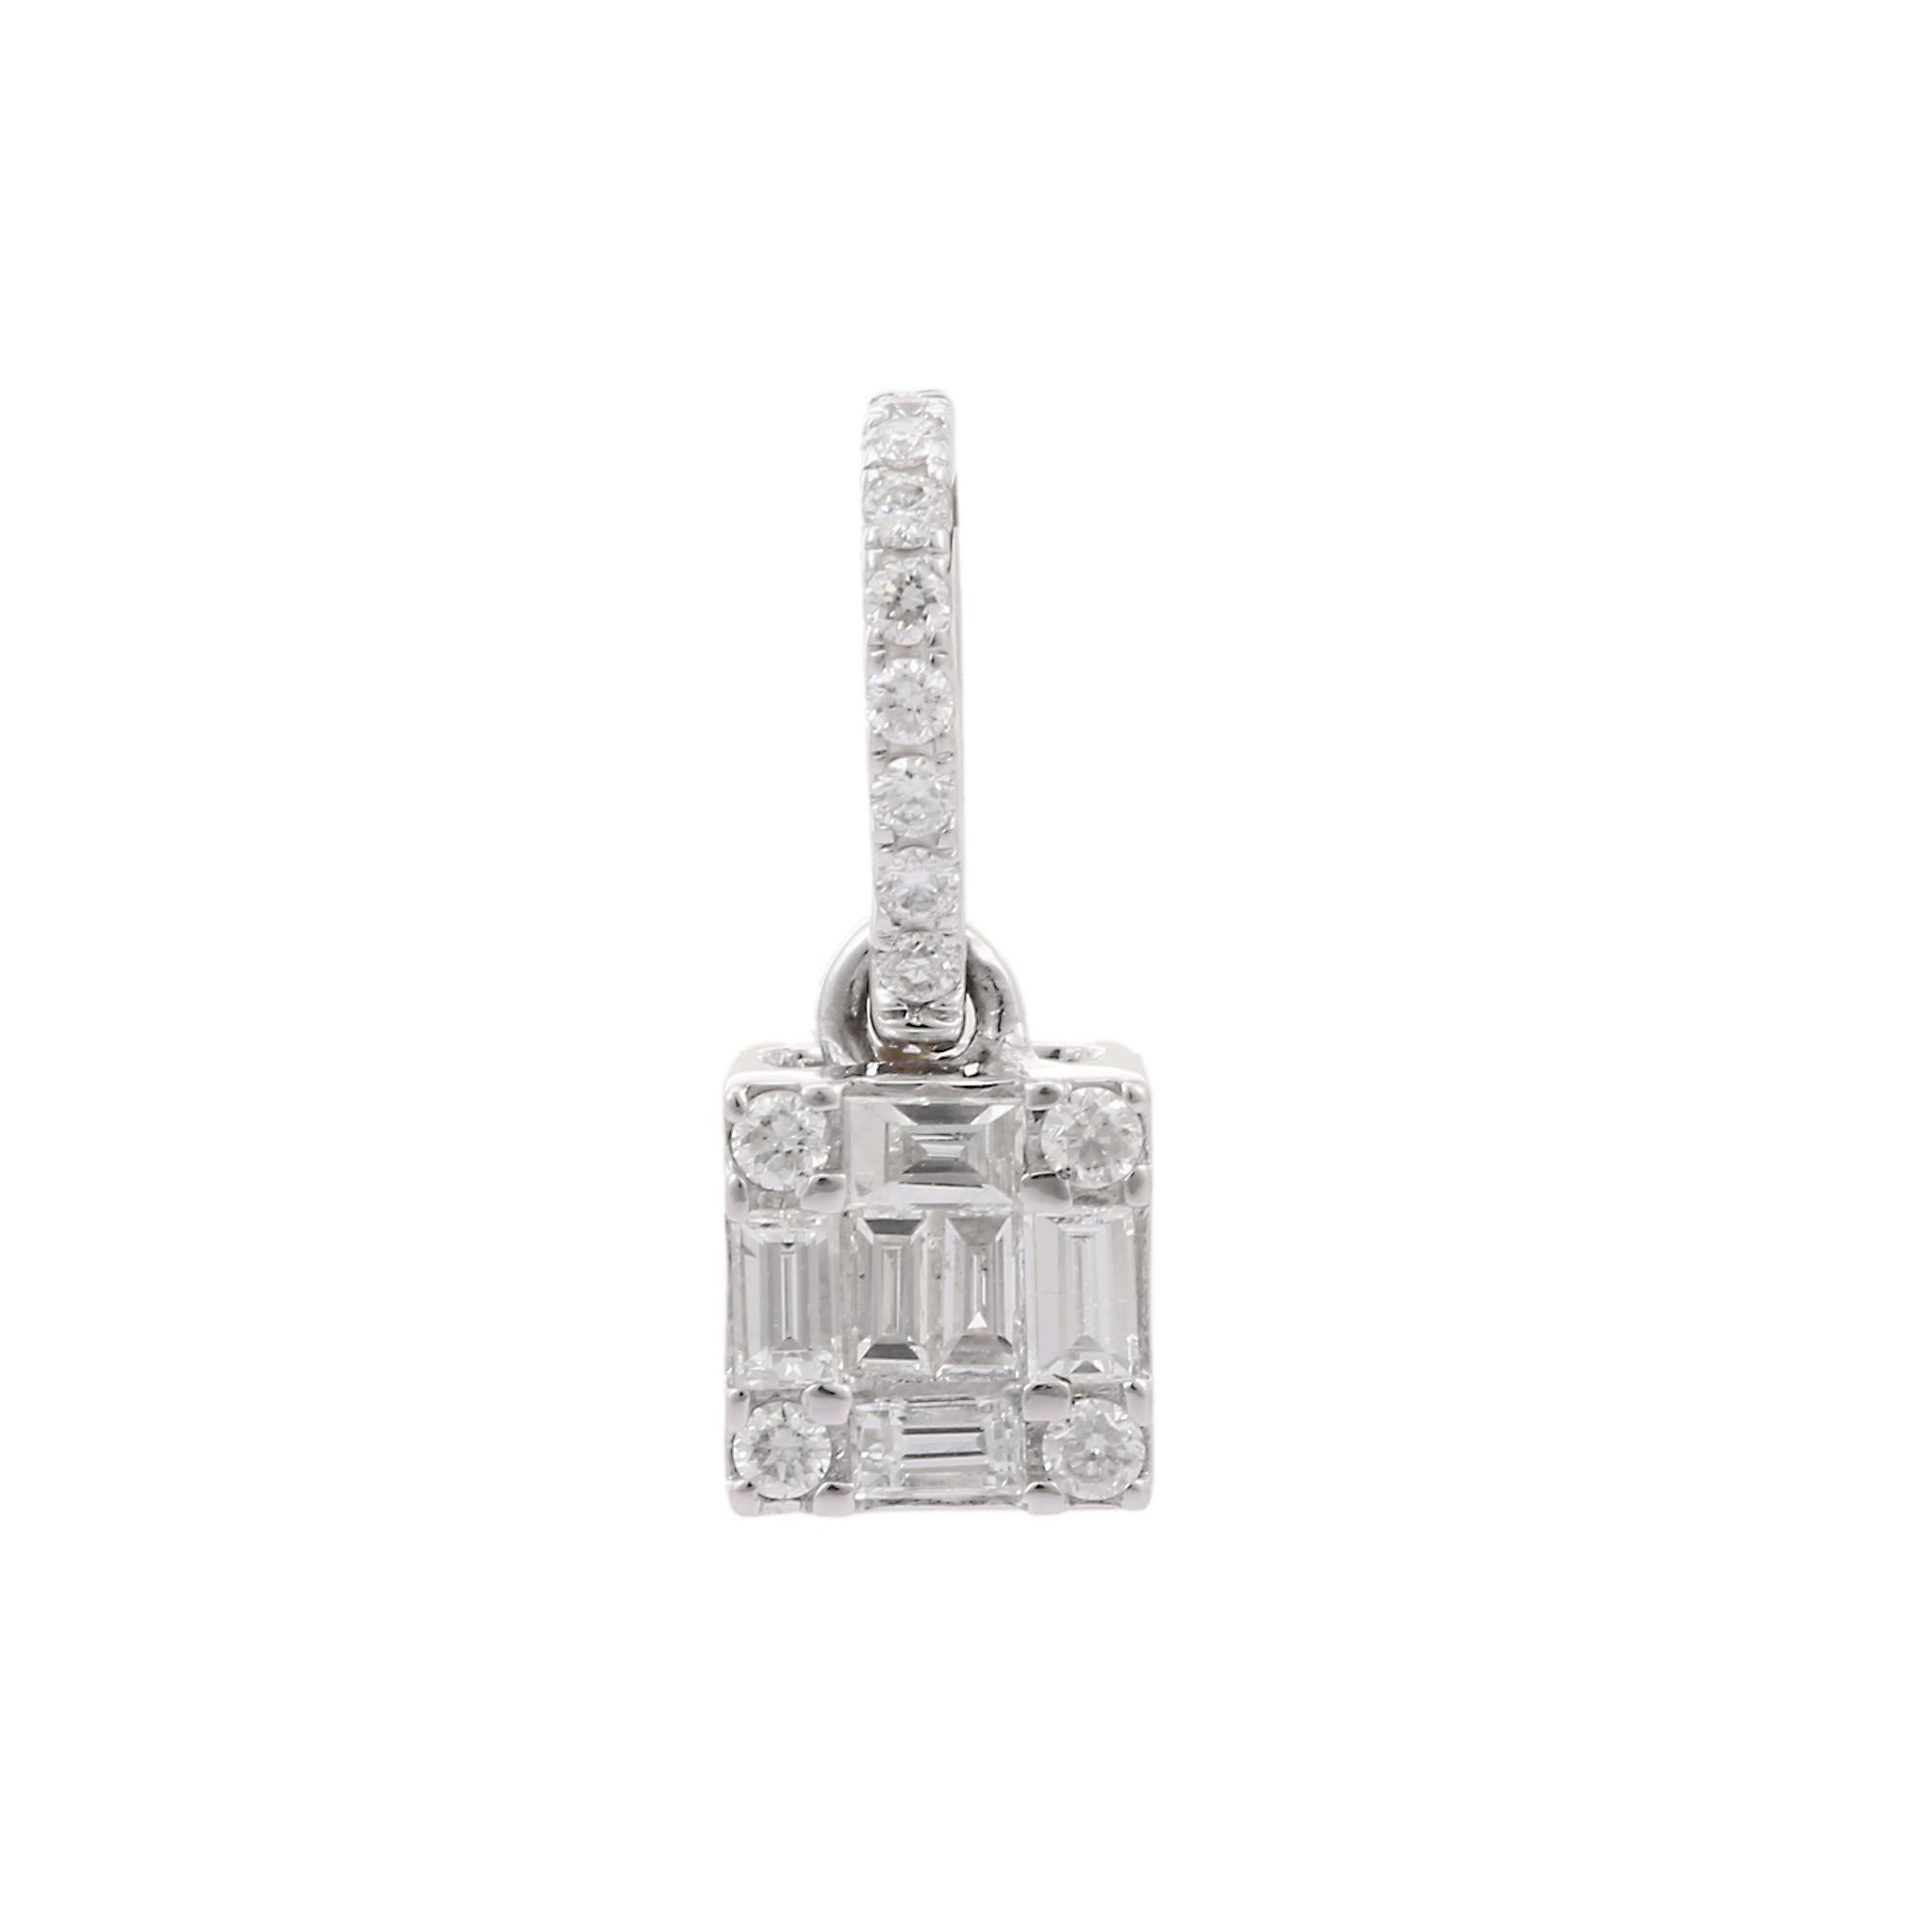 Modern 0.35 ct Diamond Wedding Pendant Necklace For Her Studded in 14K White Gold For Sale